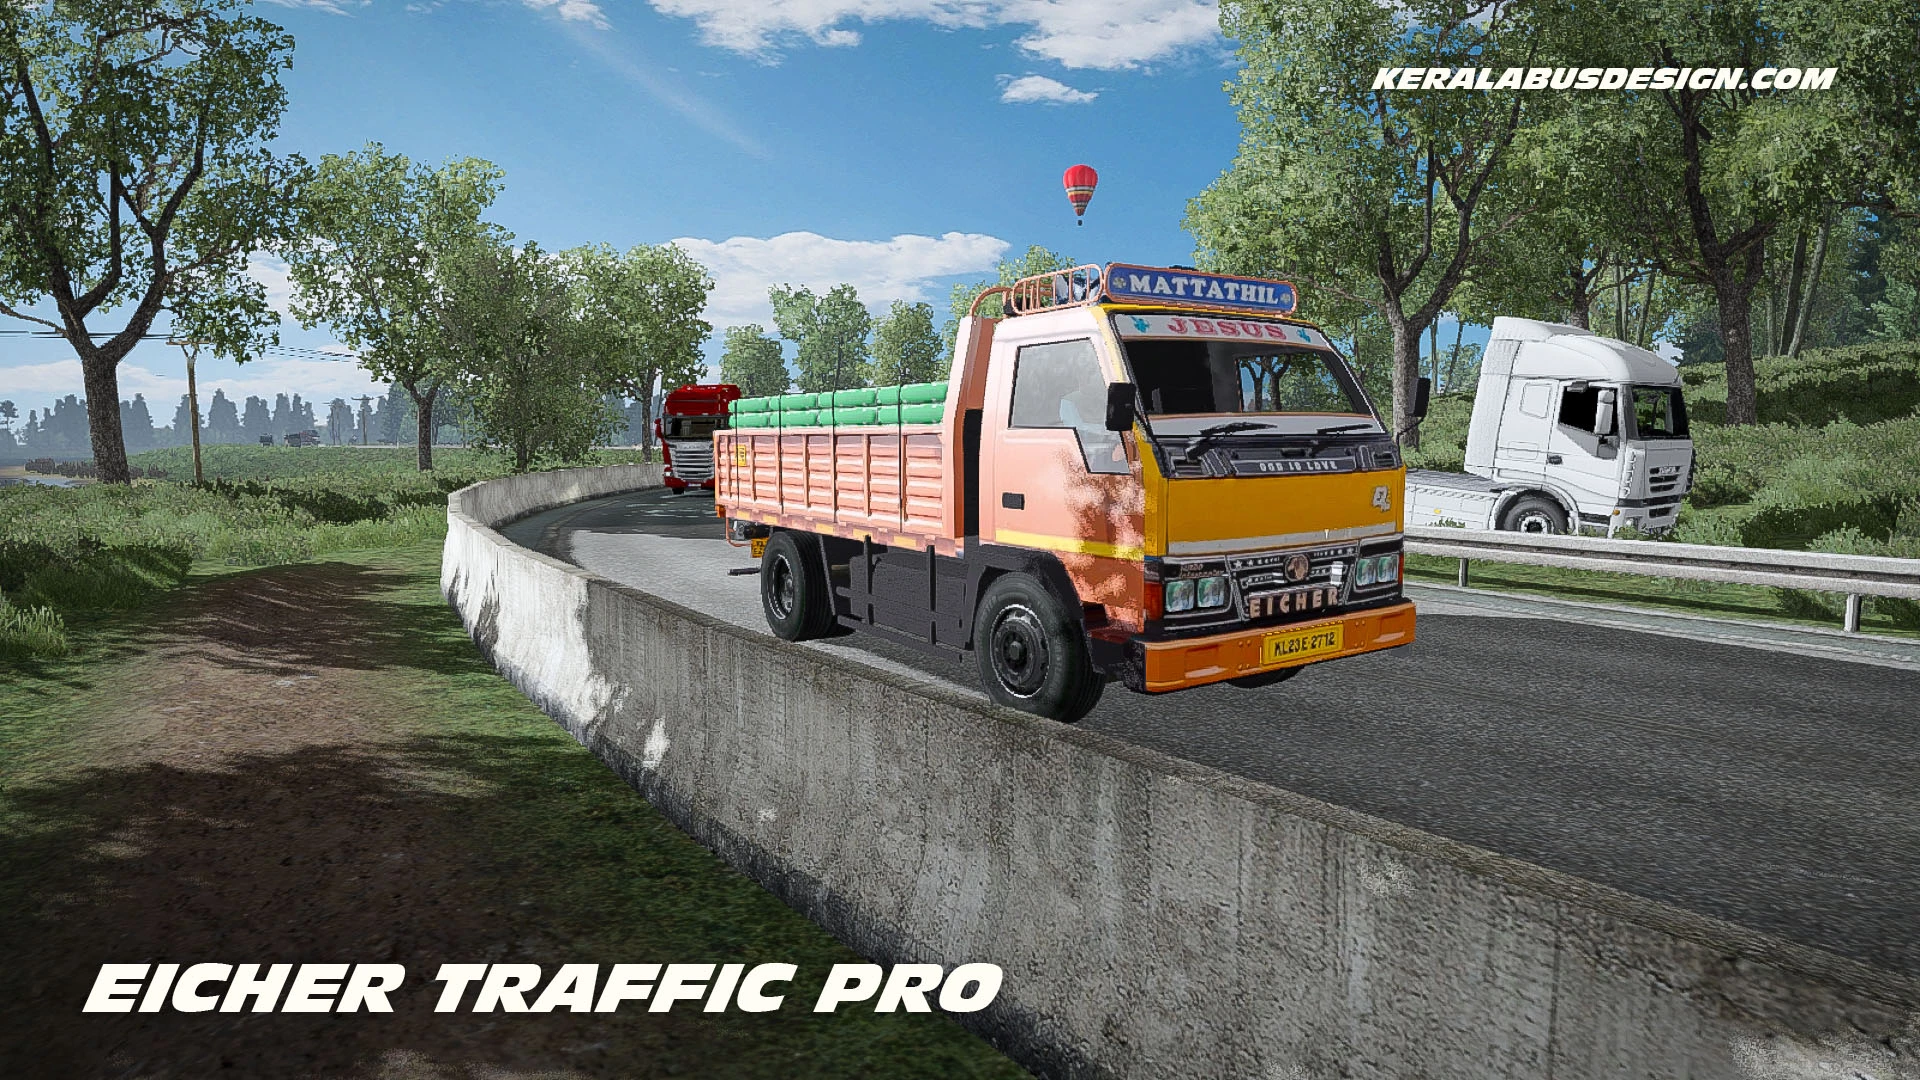 EICHER TRAFFIC LIMITED DENSITY AND DX11 UPDATE 1.31 TO 1.41 V2 - ETS 2